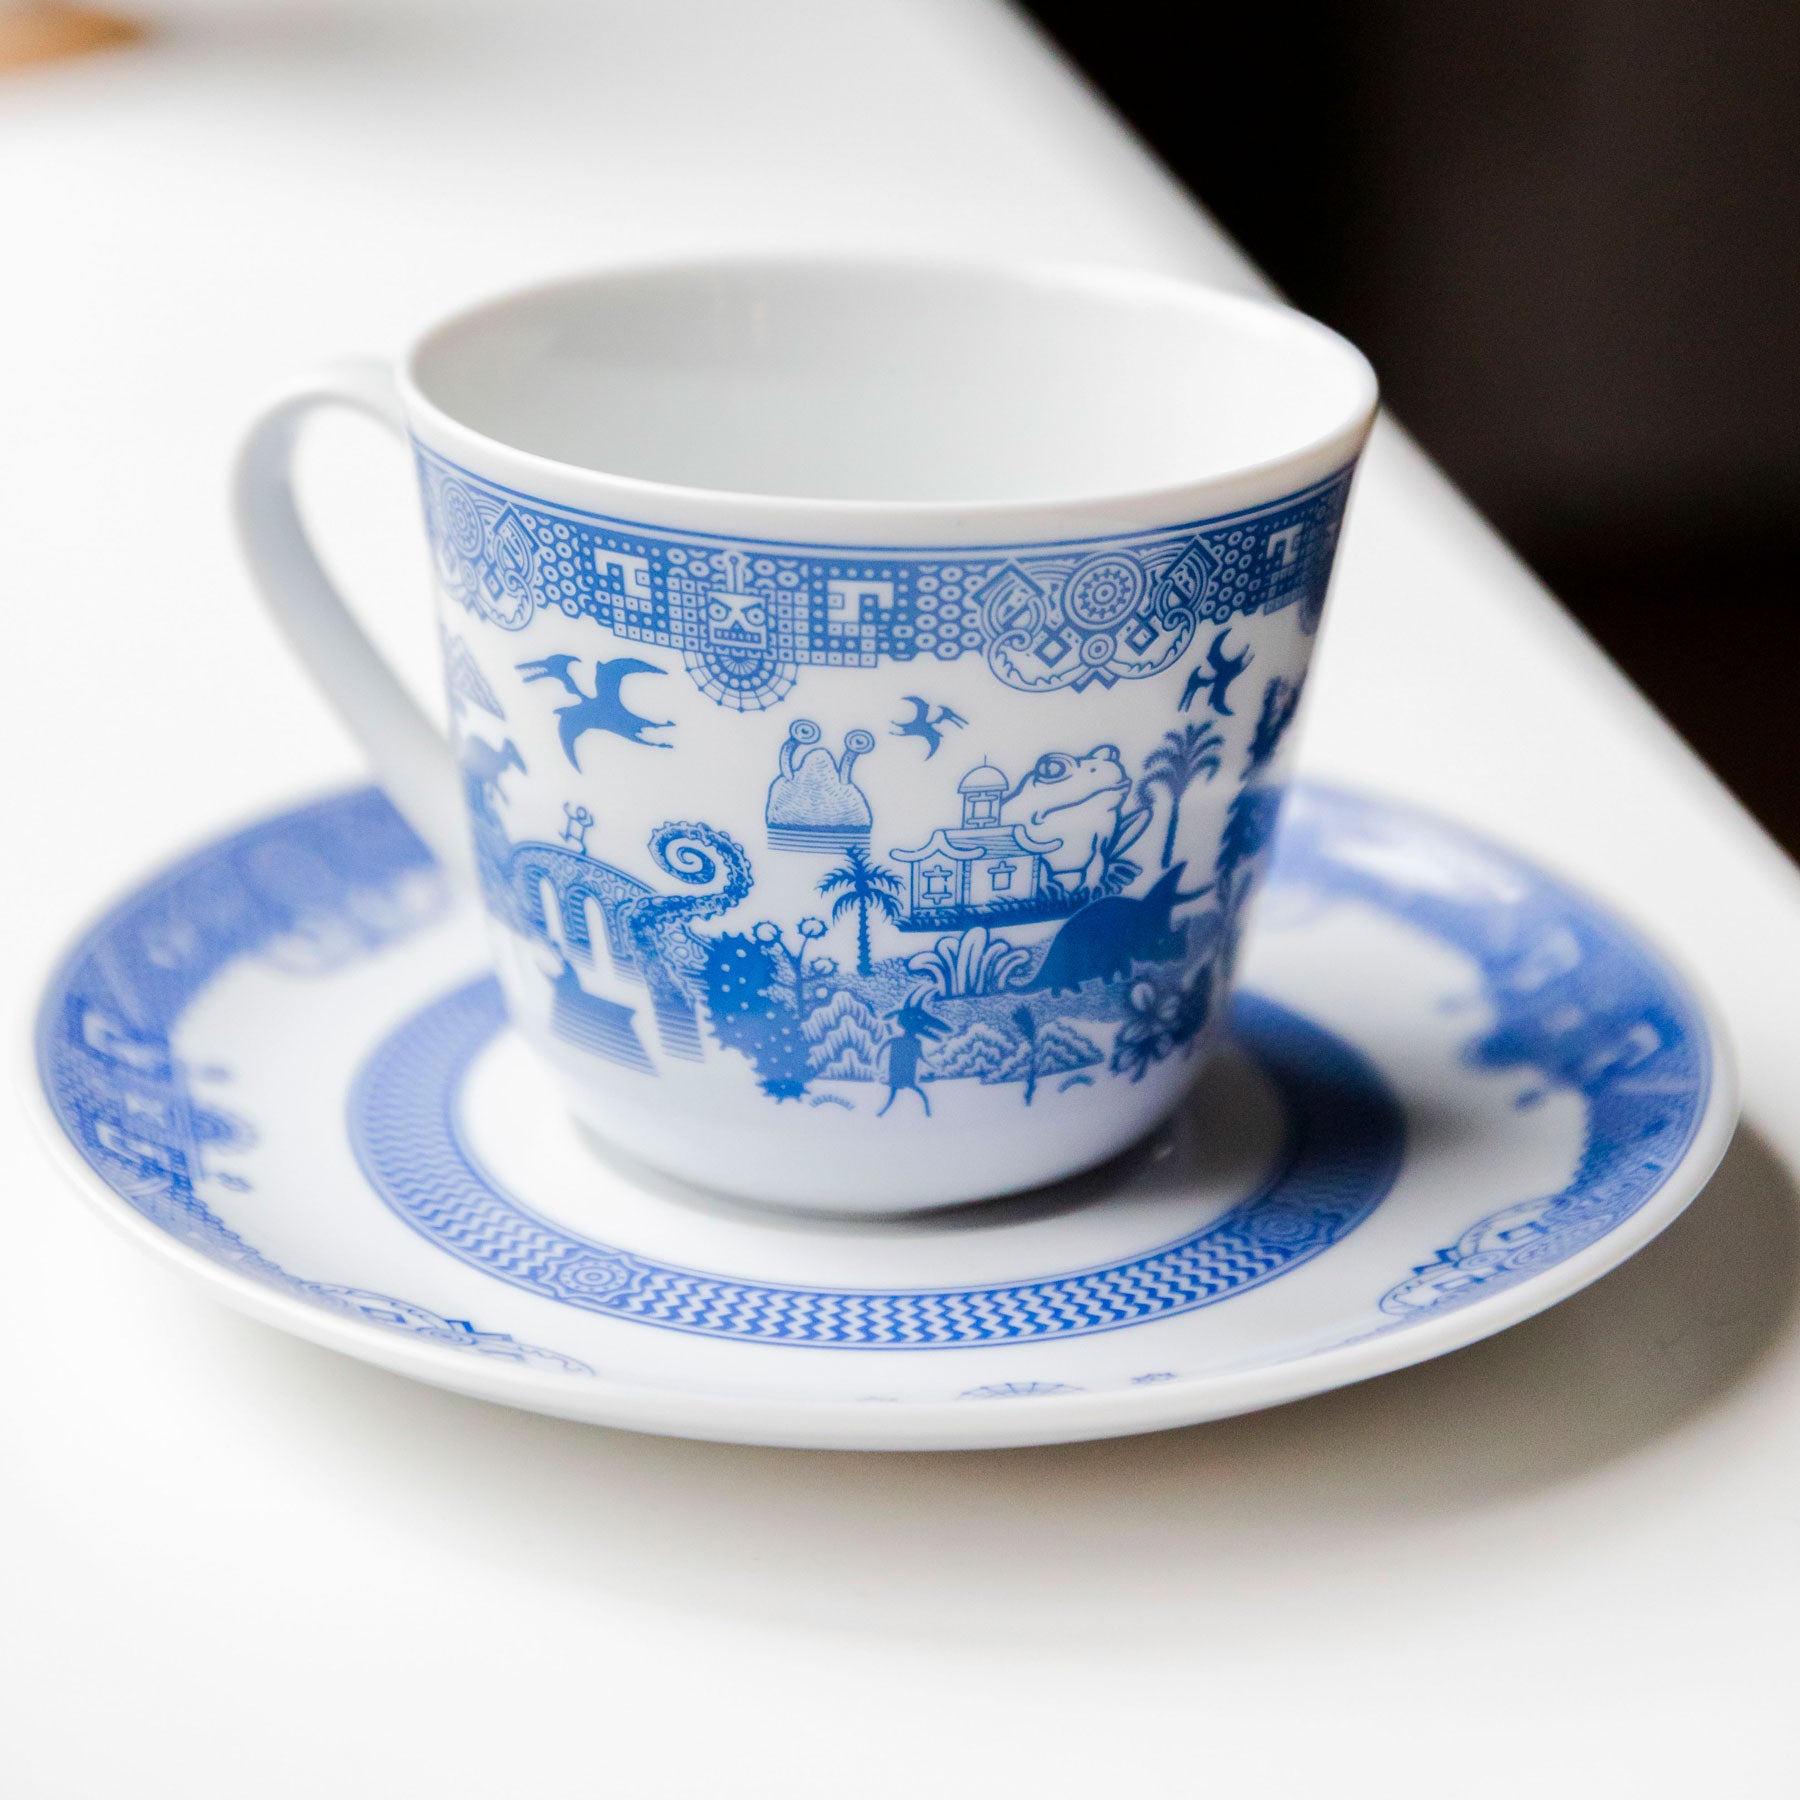 Things Could Be Worse Tea Set - Calamityware®